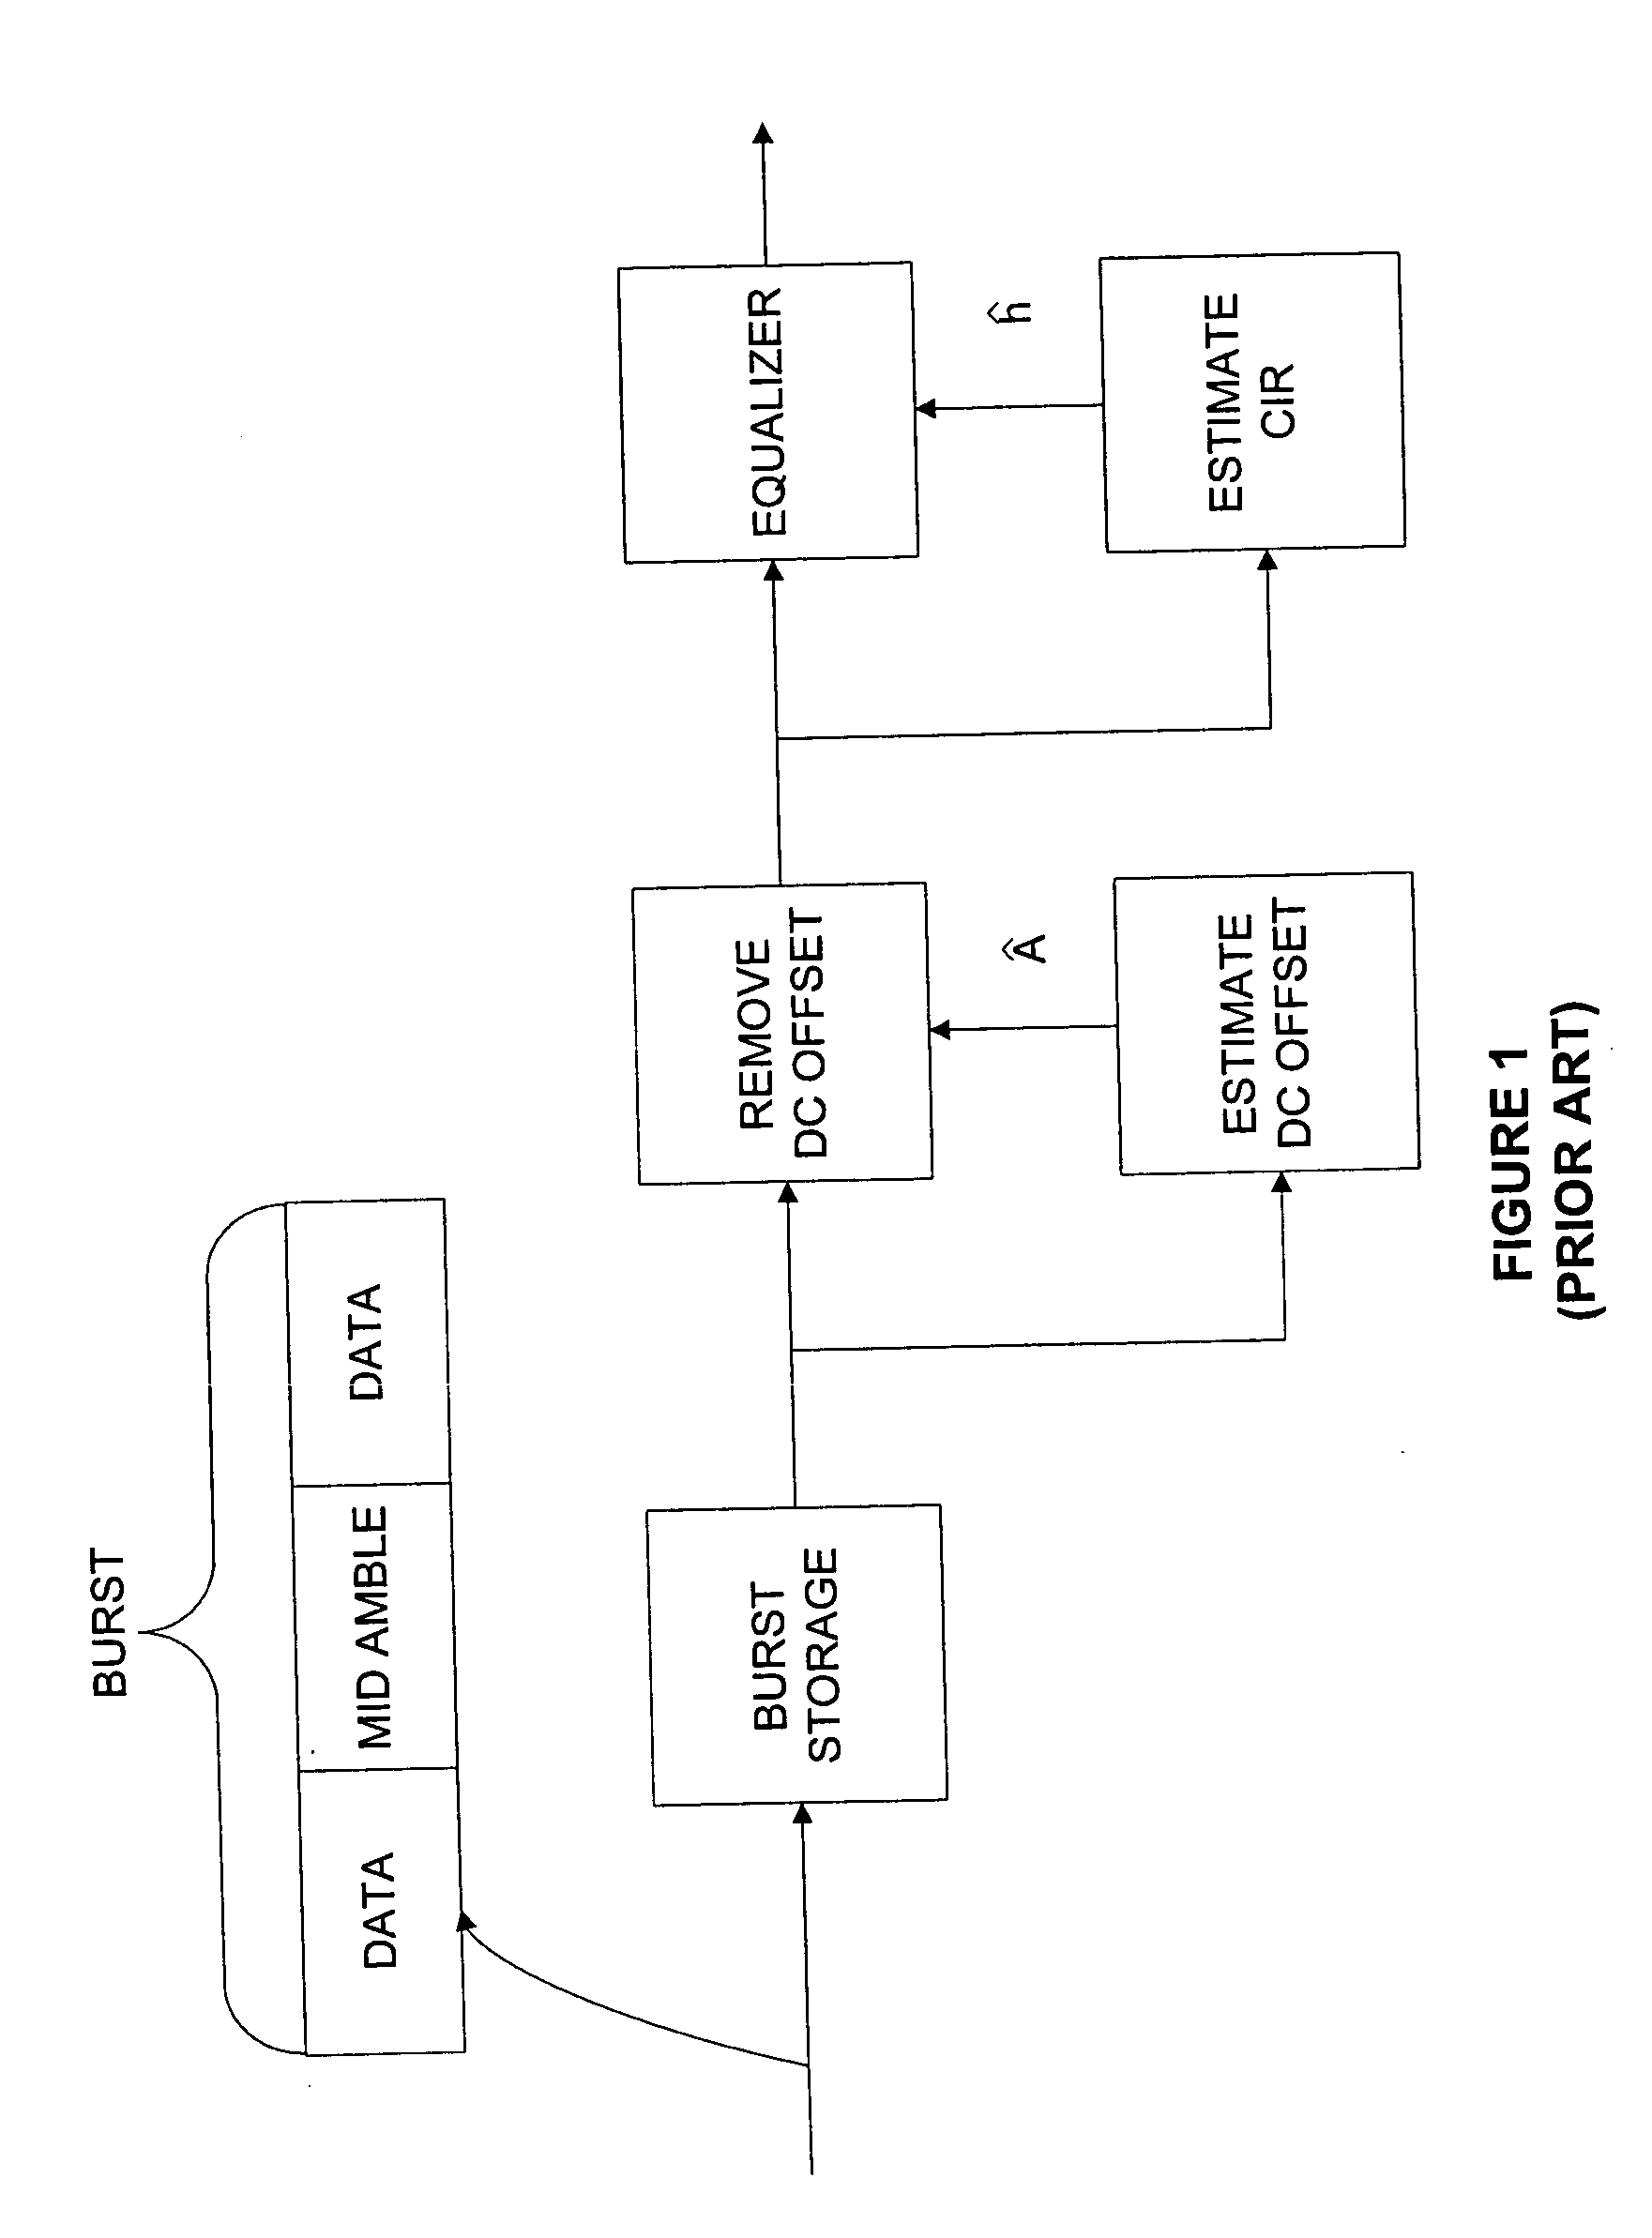 Method for joint DC offset correction and channel coefficient estimation in a receiver